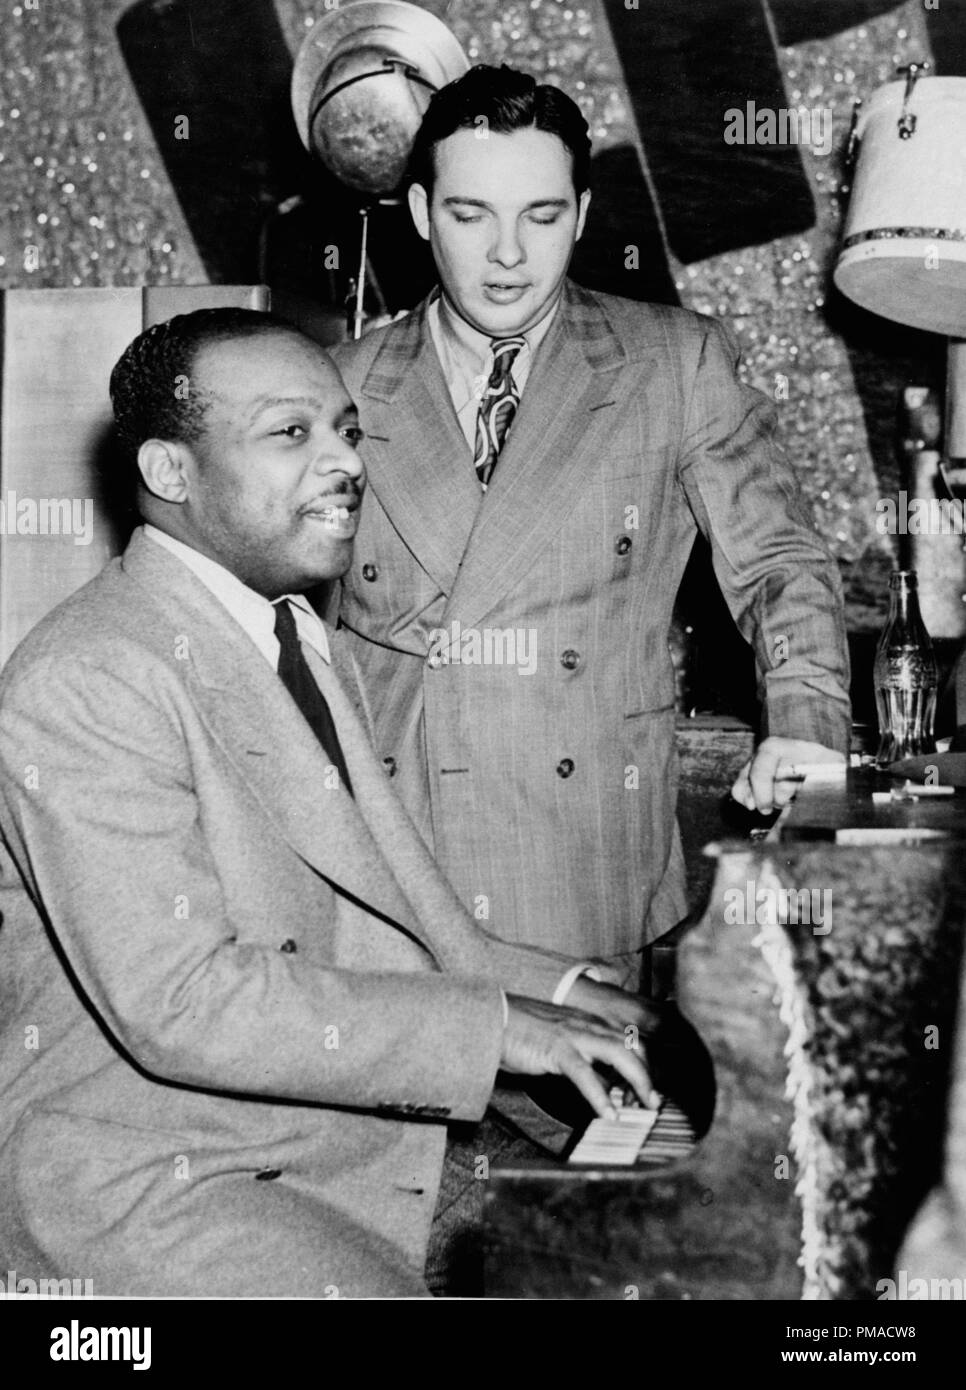 Portrait of Count Basie and Bob Crosby, Howard Theater, Washington, D.C., circa 1941. Photo by: William P. Gottlieb File Reference # 32368 468THA Stock Photo